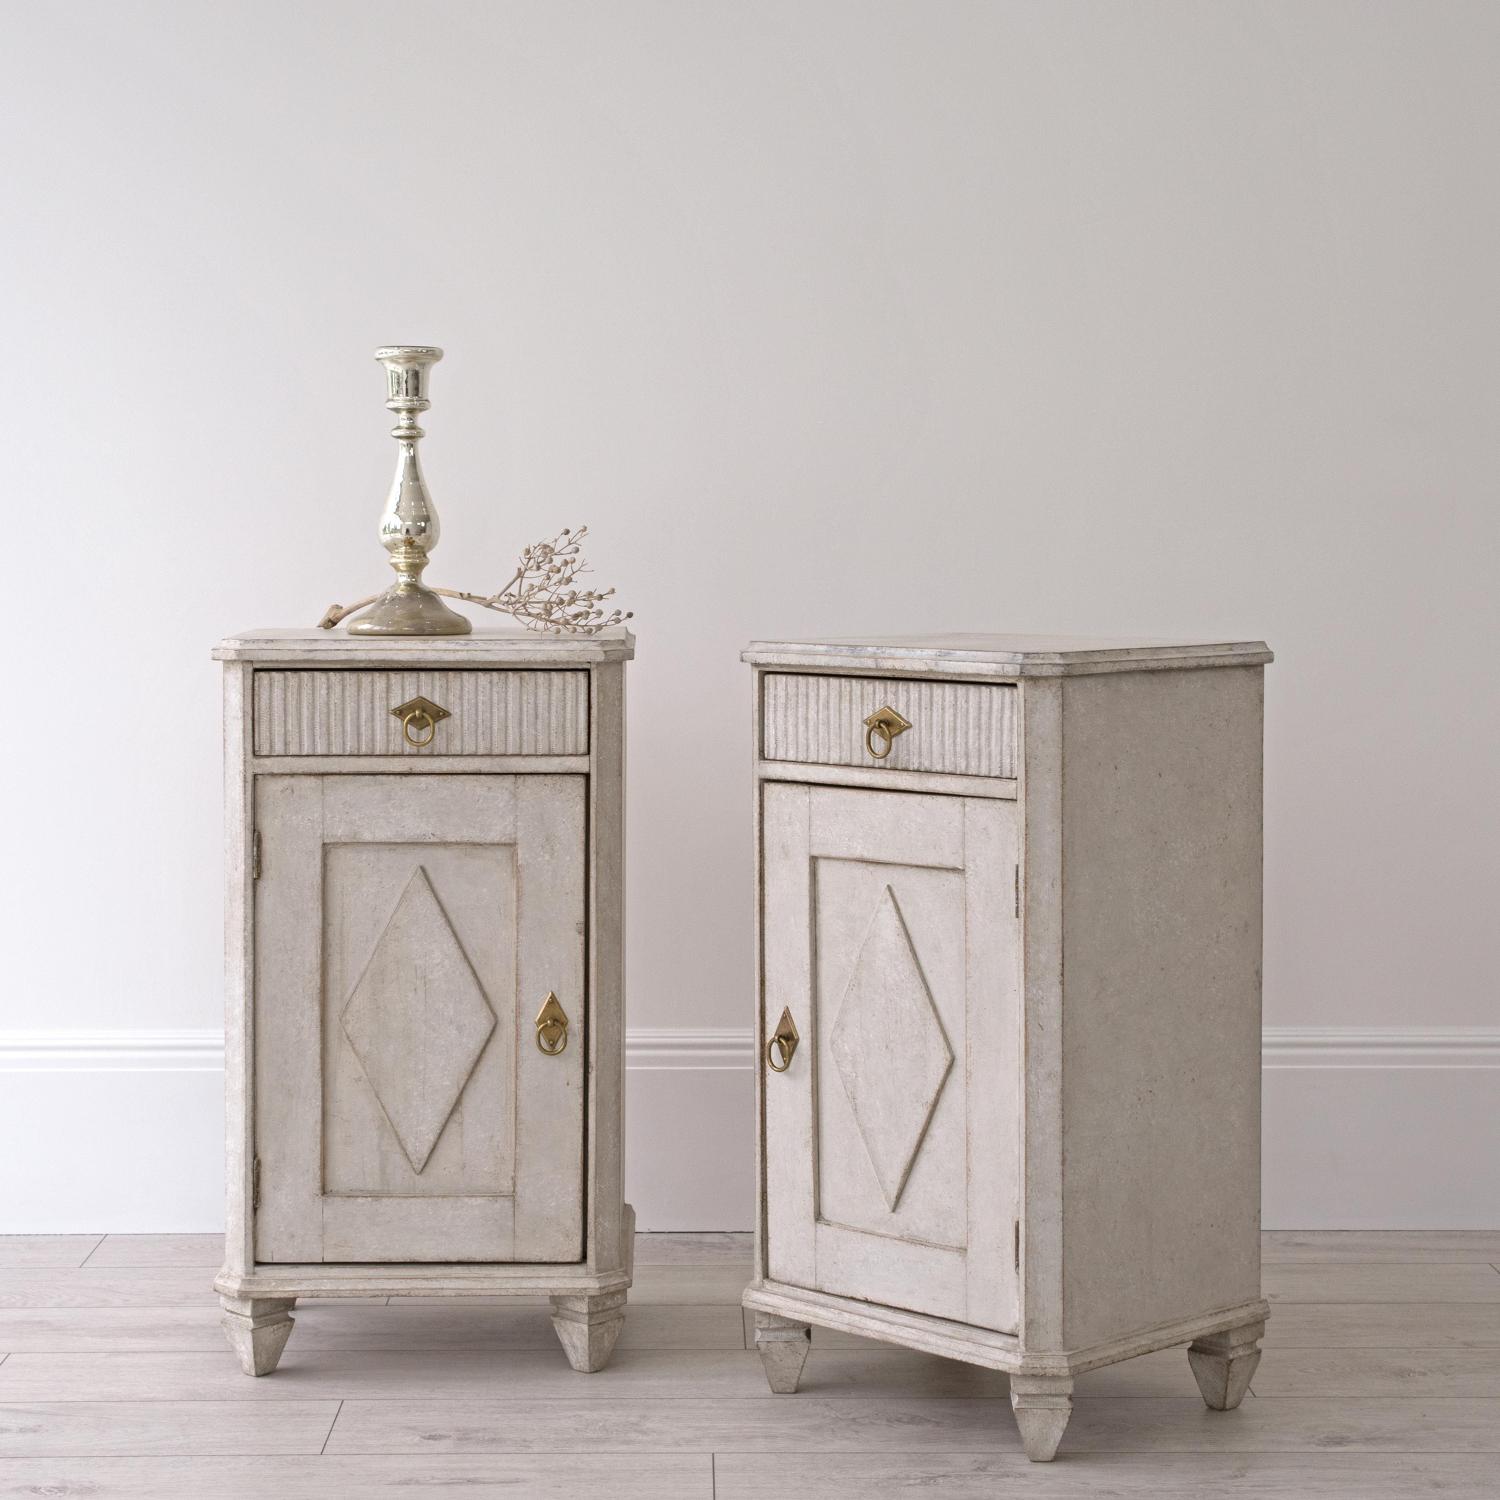 PAIR OF SWEDISH GUSTAVIAN STYLE BEDSIDE CABINETS